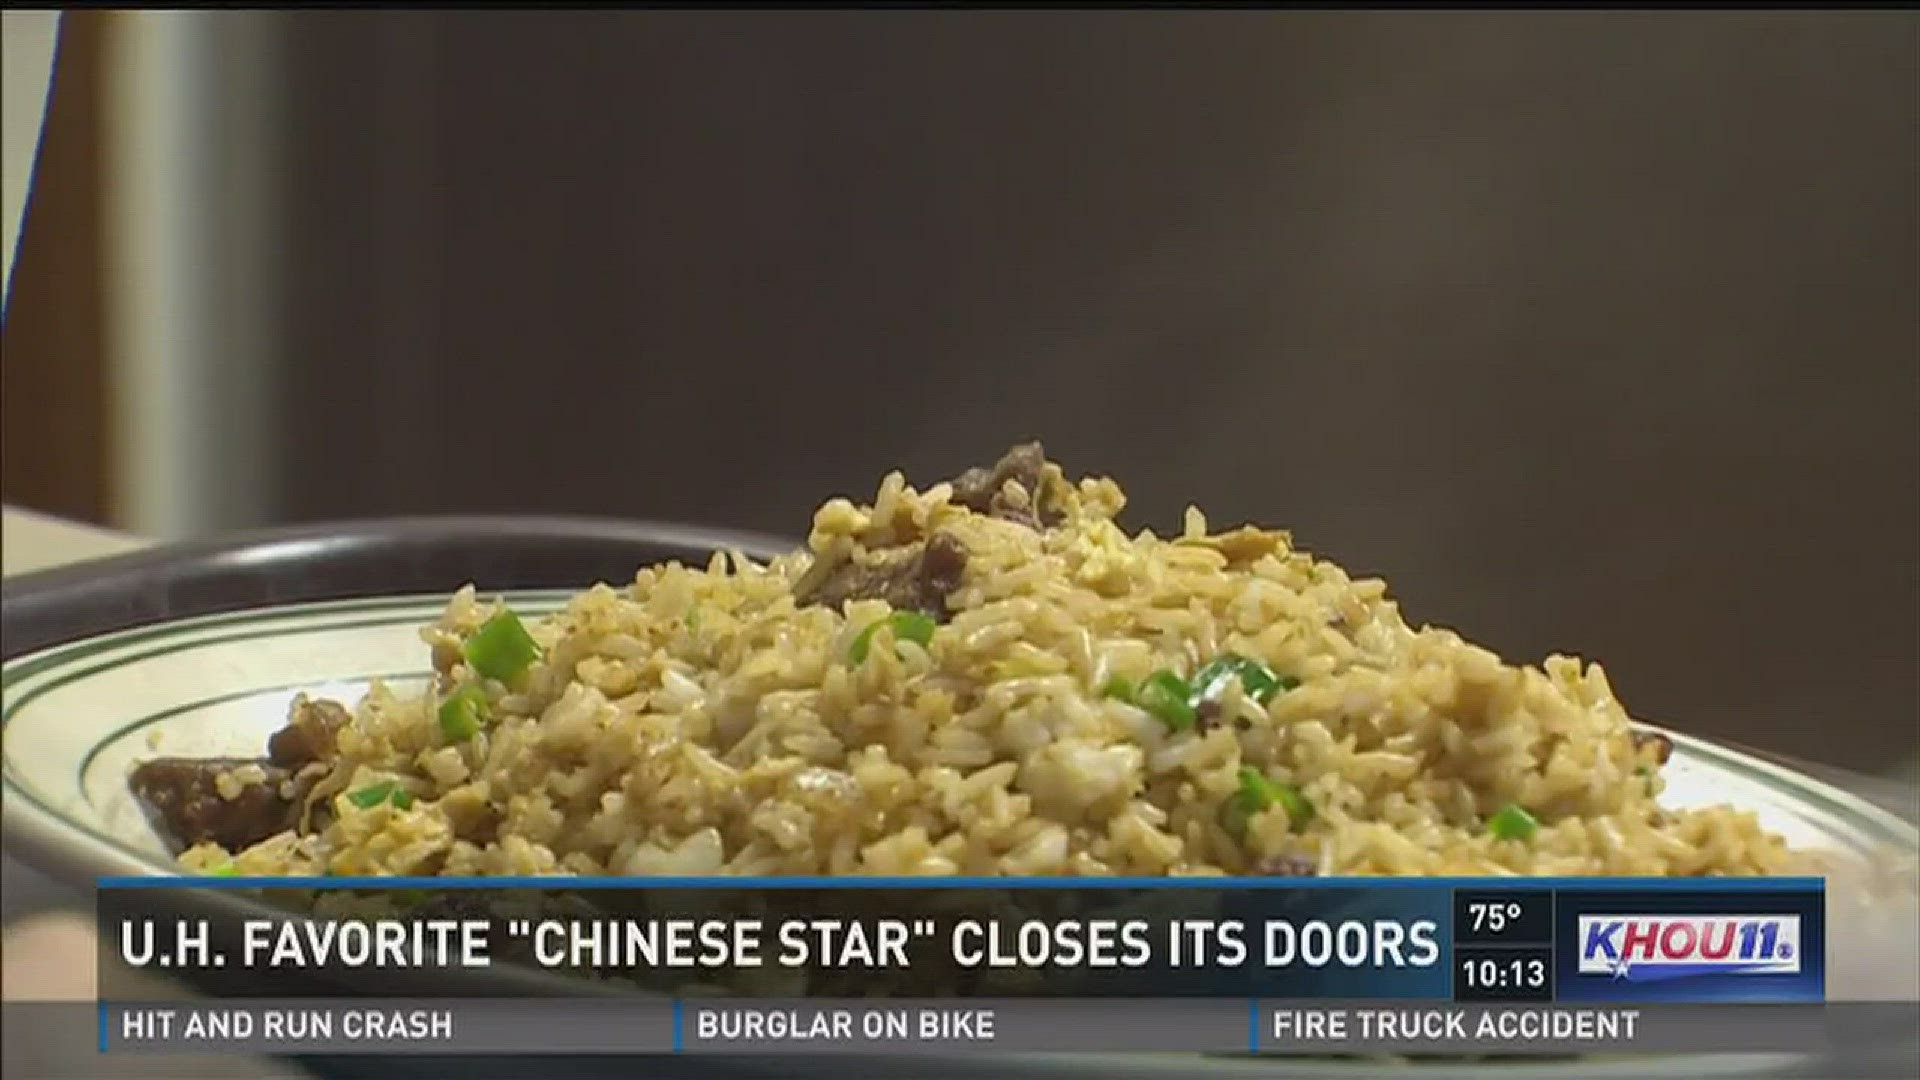 Houston, TX - For more than 26 years, Chinese Star restaurant, located in the heart of the University of Houston campus, has been a home away from home for students.